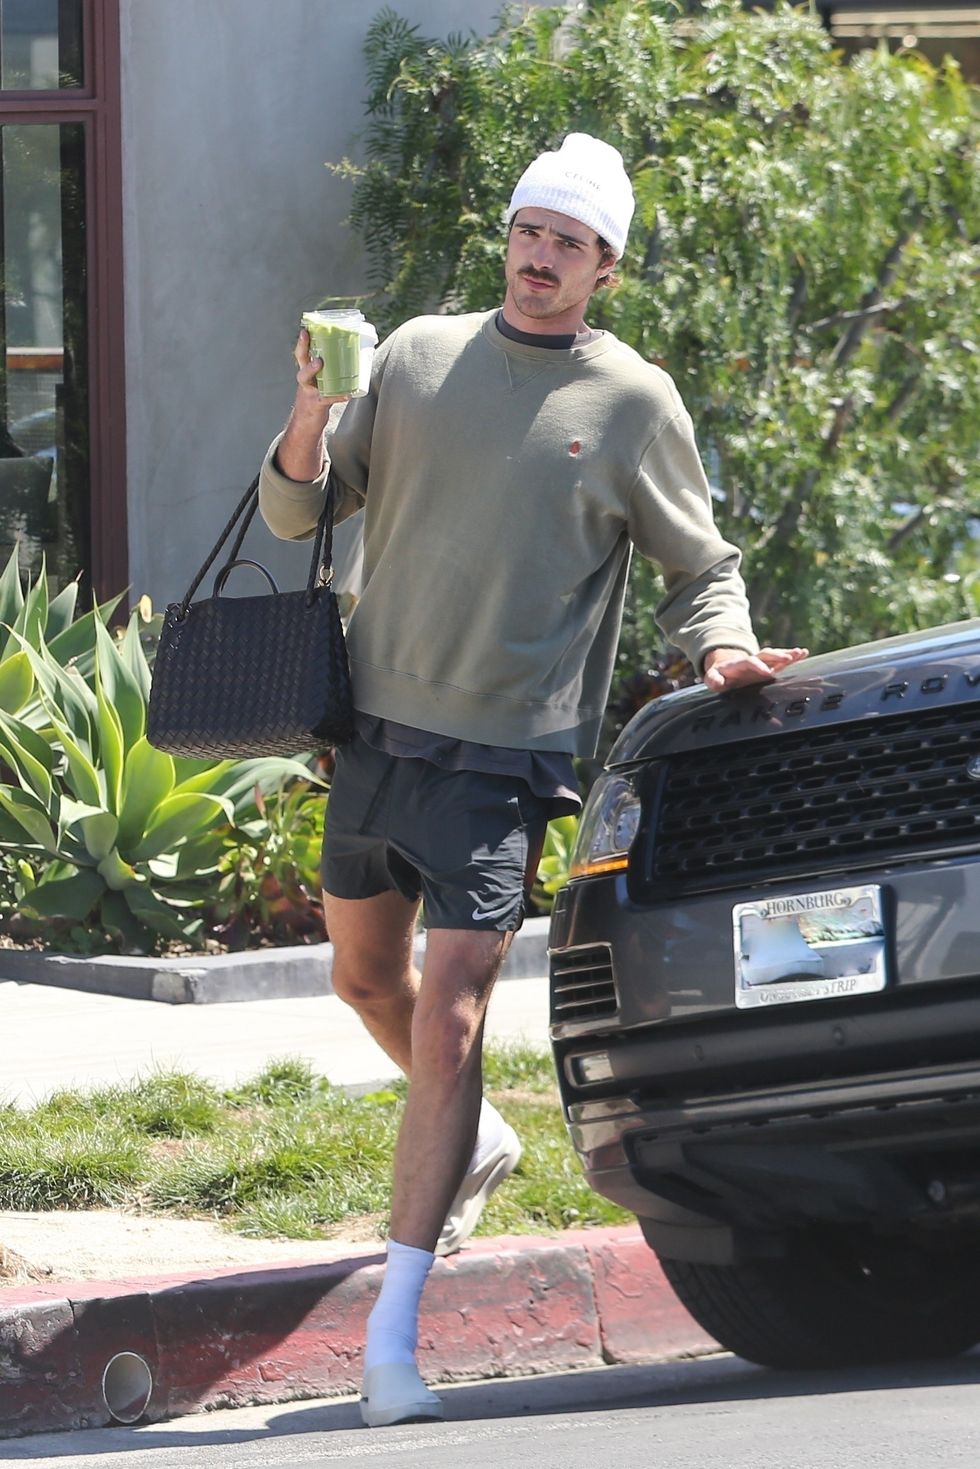 west hollywood, ca exclusive 'euphoria' star jacob elordi stops by verve coffee for a couple of drinks while out running errands with his dogpictured jacob elordibackgrid usa 28 march 2023 usa 1 310 798 9111 usasalesbackgridcomuk 44 208 344 2007 uksalesbackgridcomuk clients pictures containing childrenplease pixelate face prior to publication